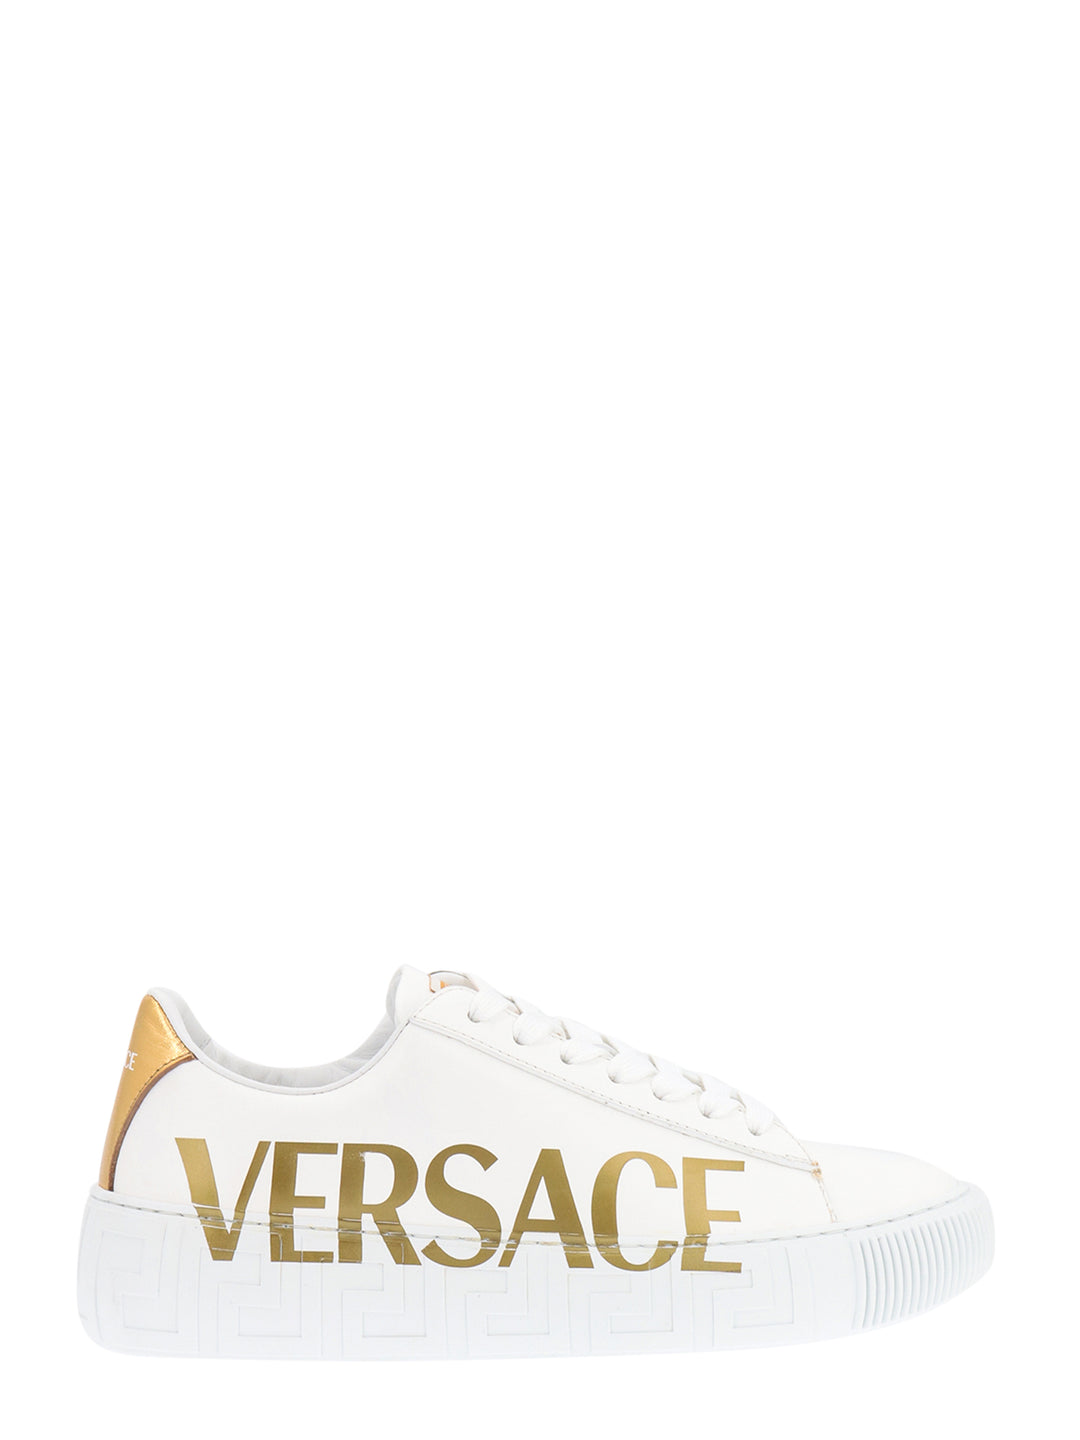 Sneakers in pelle con stampa logo golden laterale